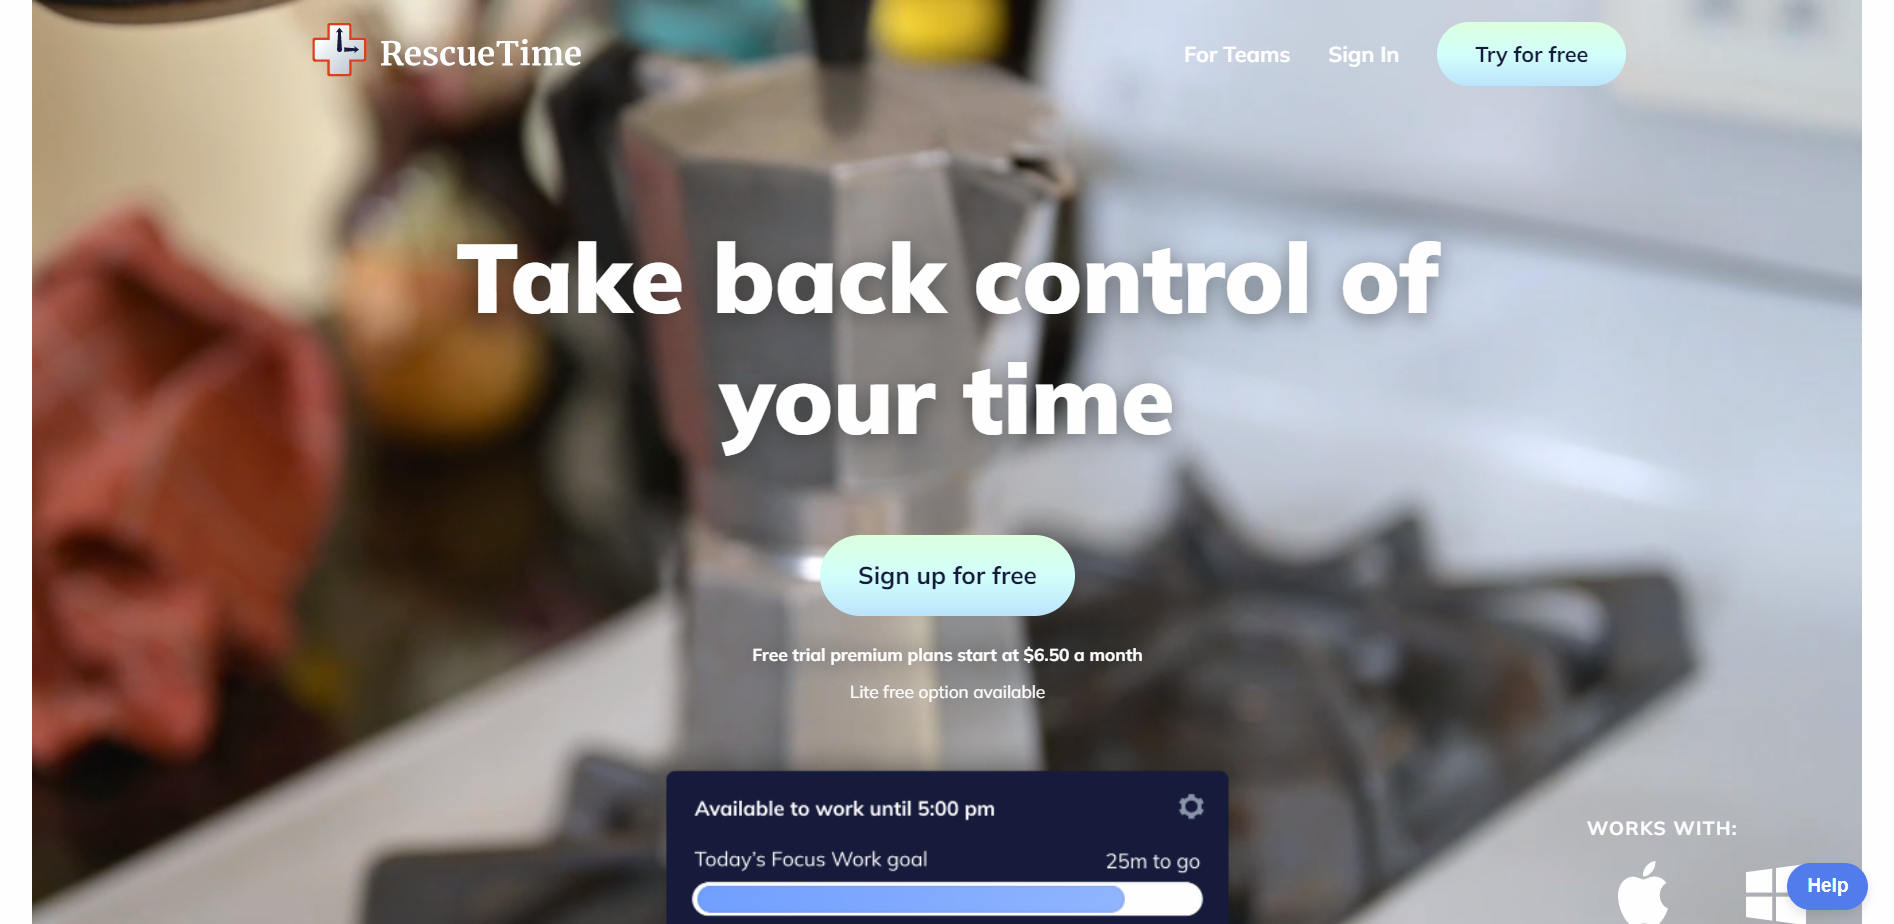 RescueTime Automatic Time Tracking and Time Management Software to Help you Focus